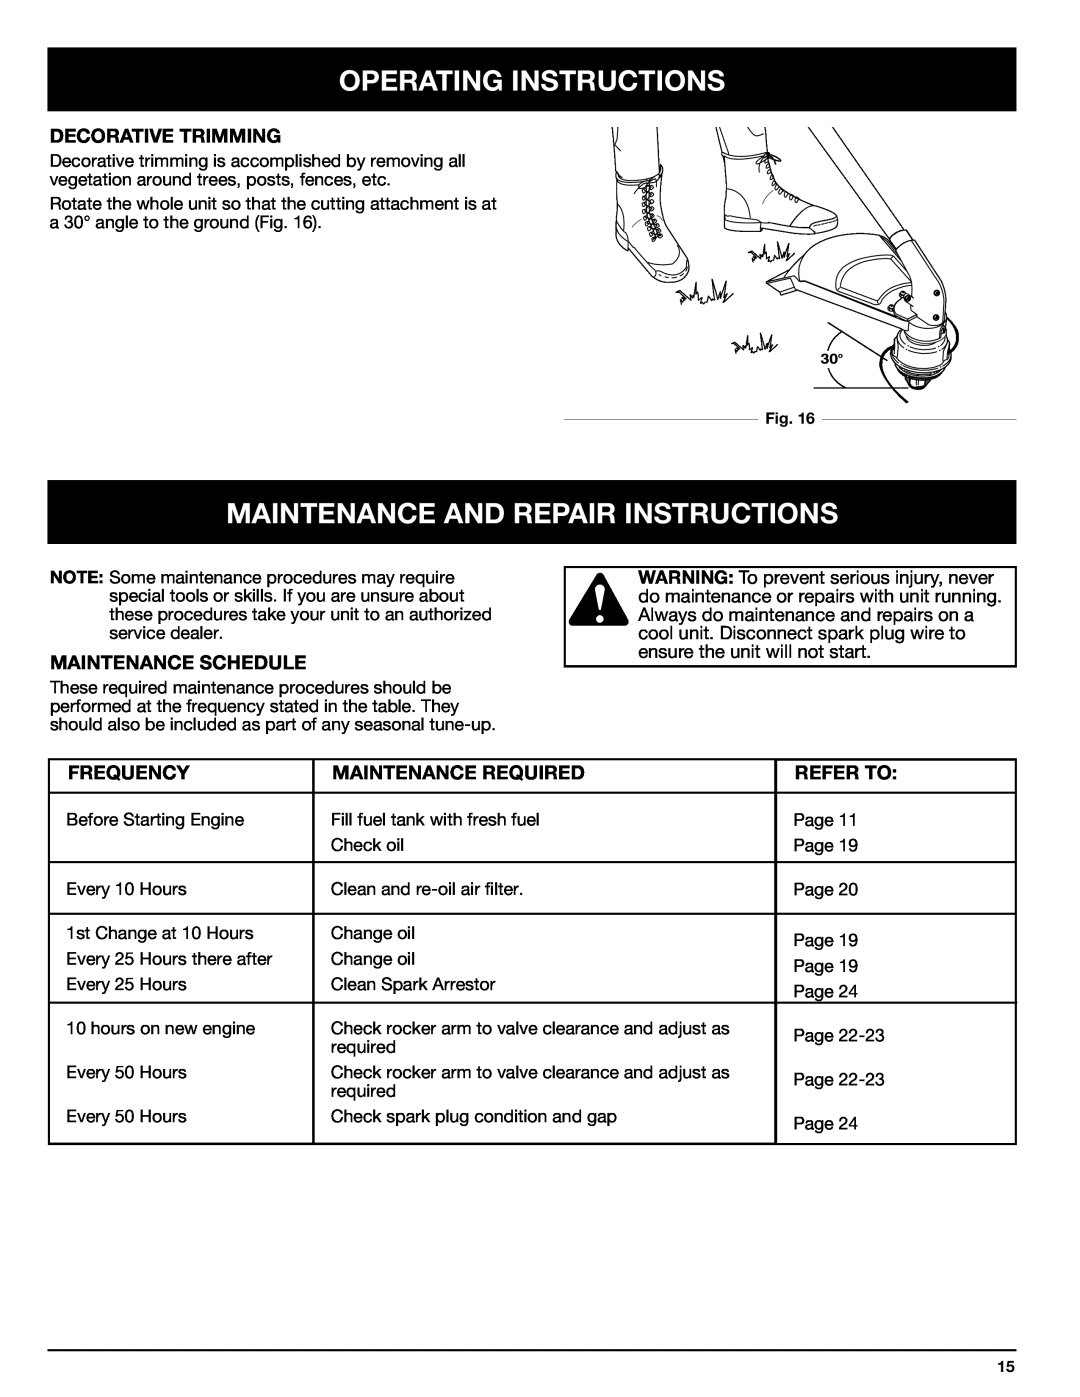 Ryobi Outdoor 875r Maintenance And Repair Instructions, Decorative Trimming, Maintenance Schedule, Frequency, Refer To 